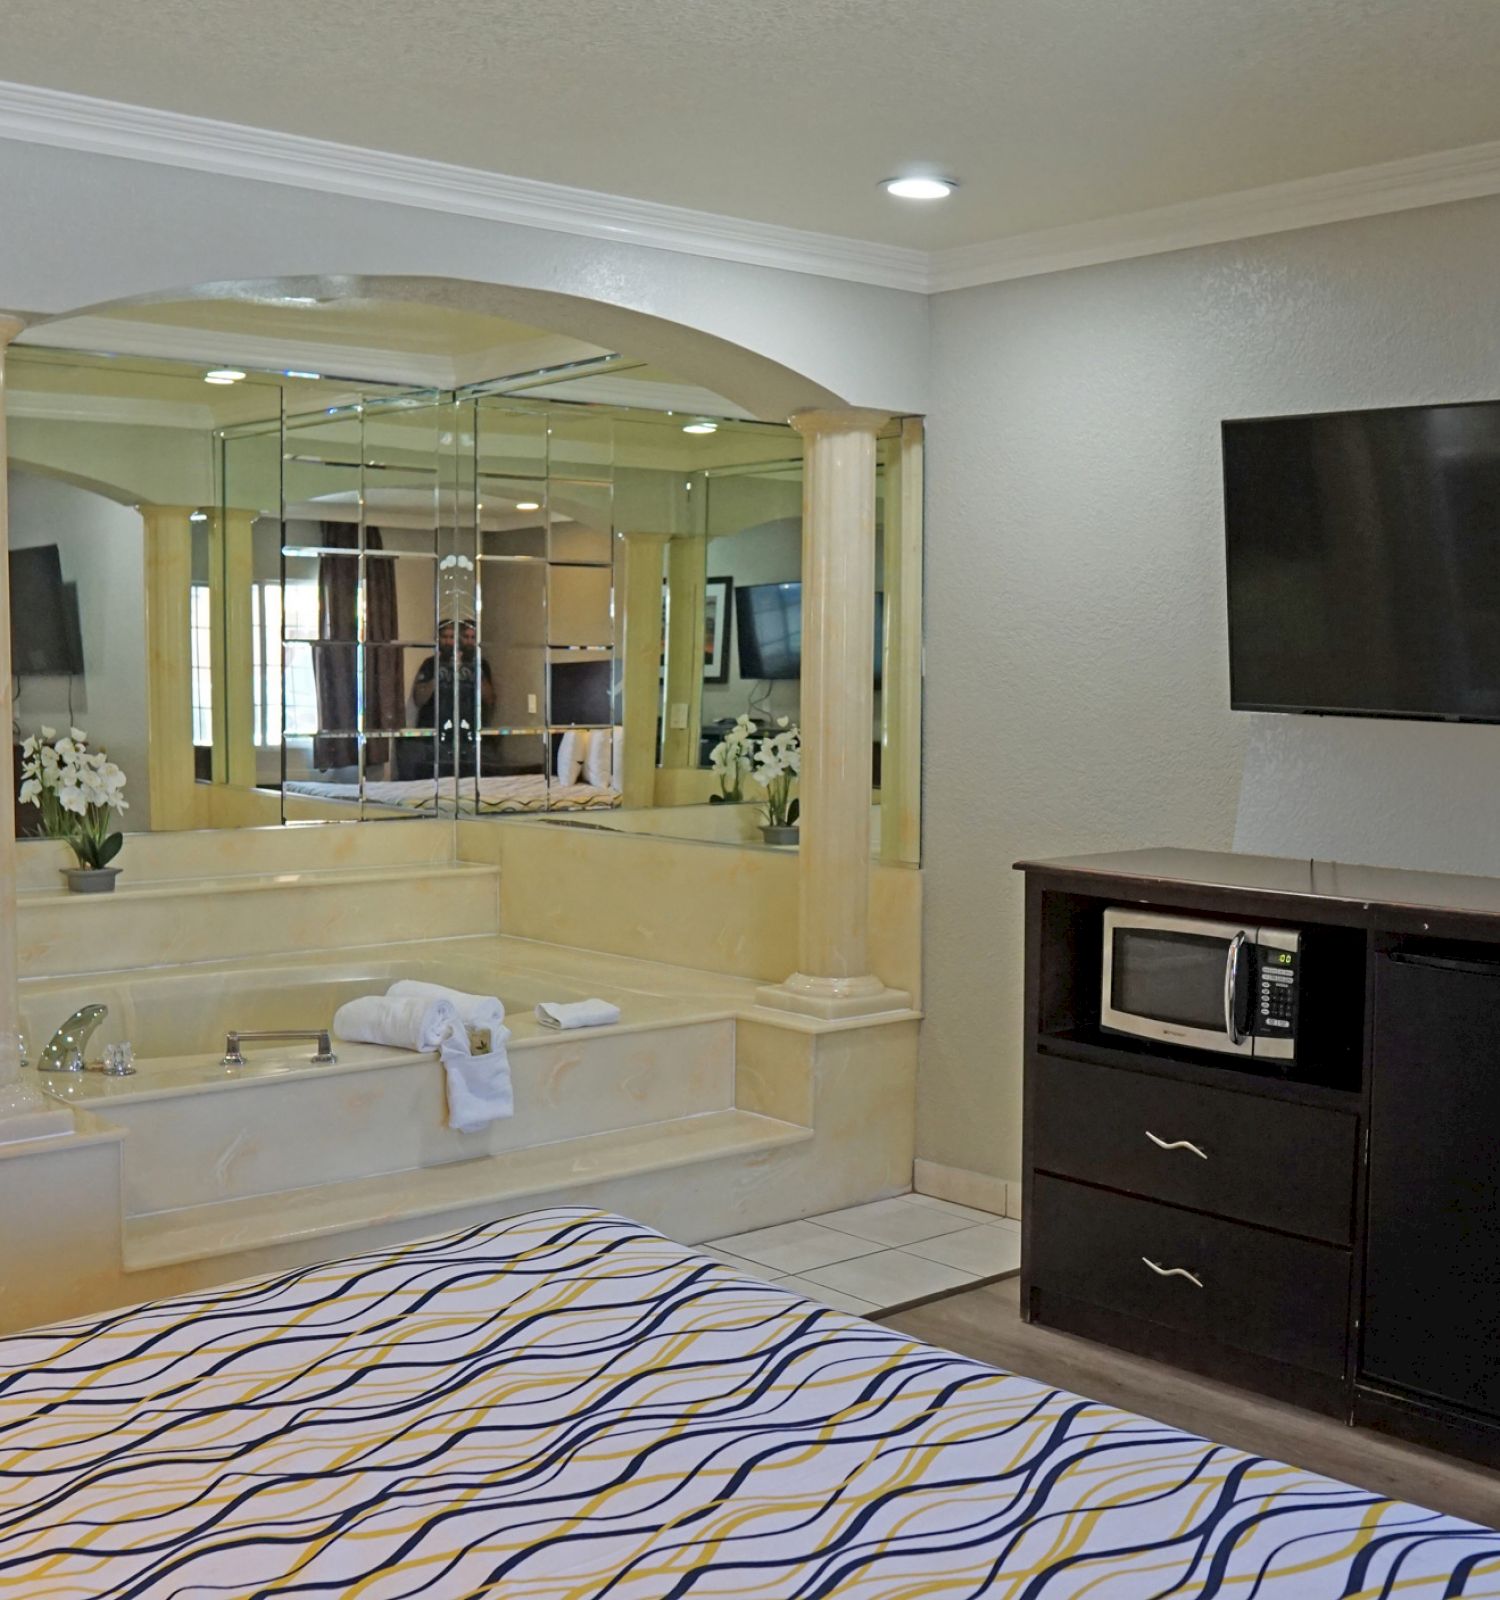 This image shows a hotel room with a bed, a wall-mounted TV, a jacuzzi tub with mirrors, a microwave, a coffee maker, a desk, and a bathroom.